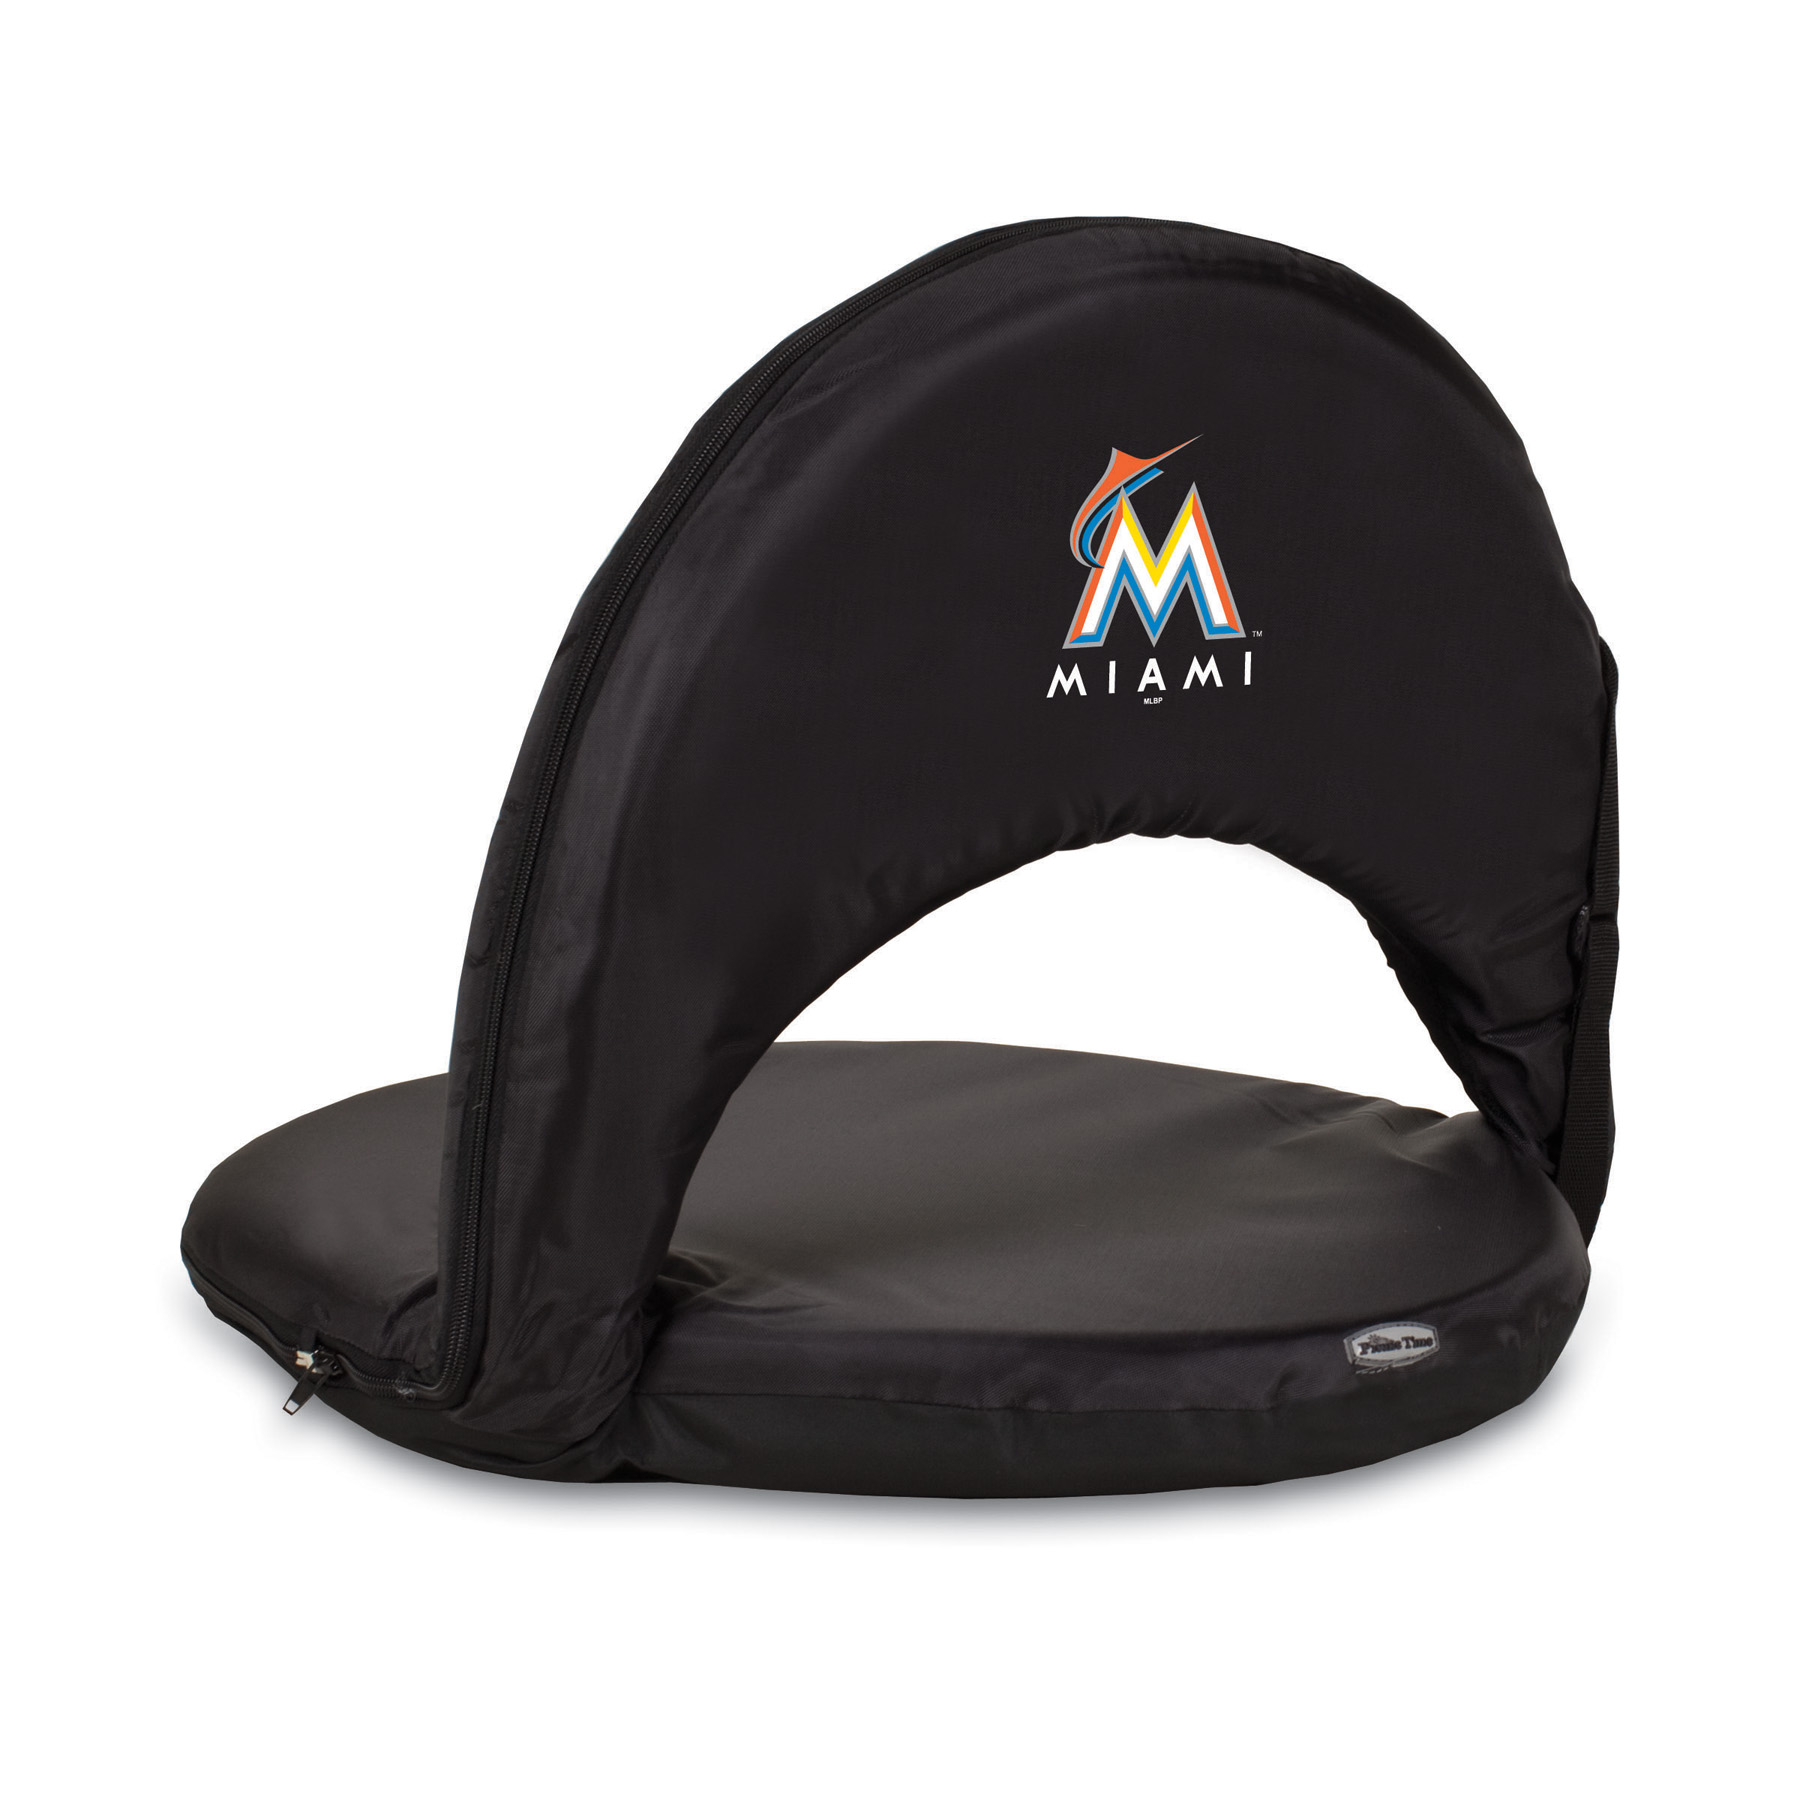 Picnic Time Miami Marlins Oniva Portable Reclining Seat